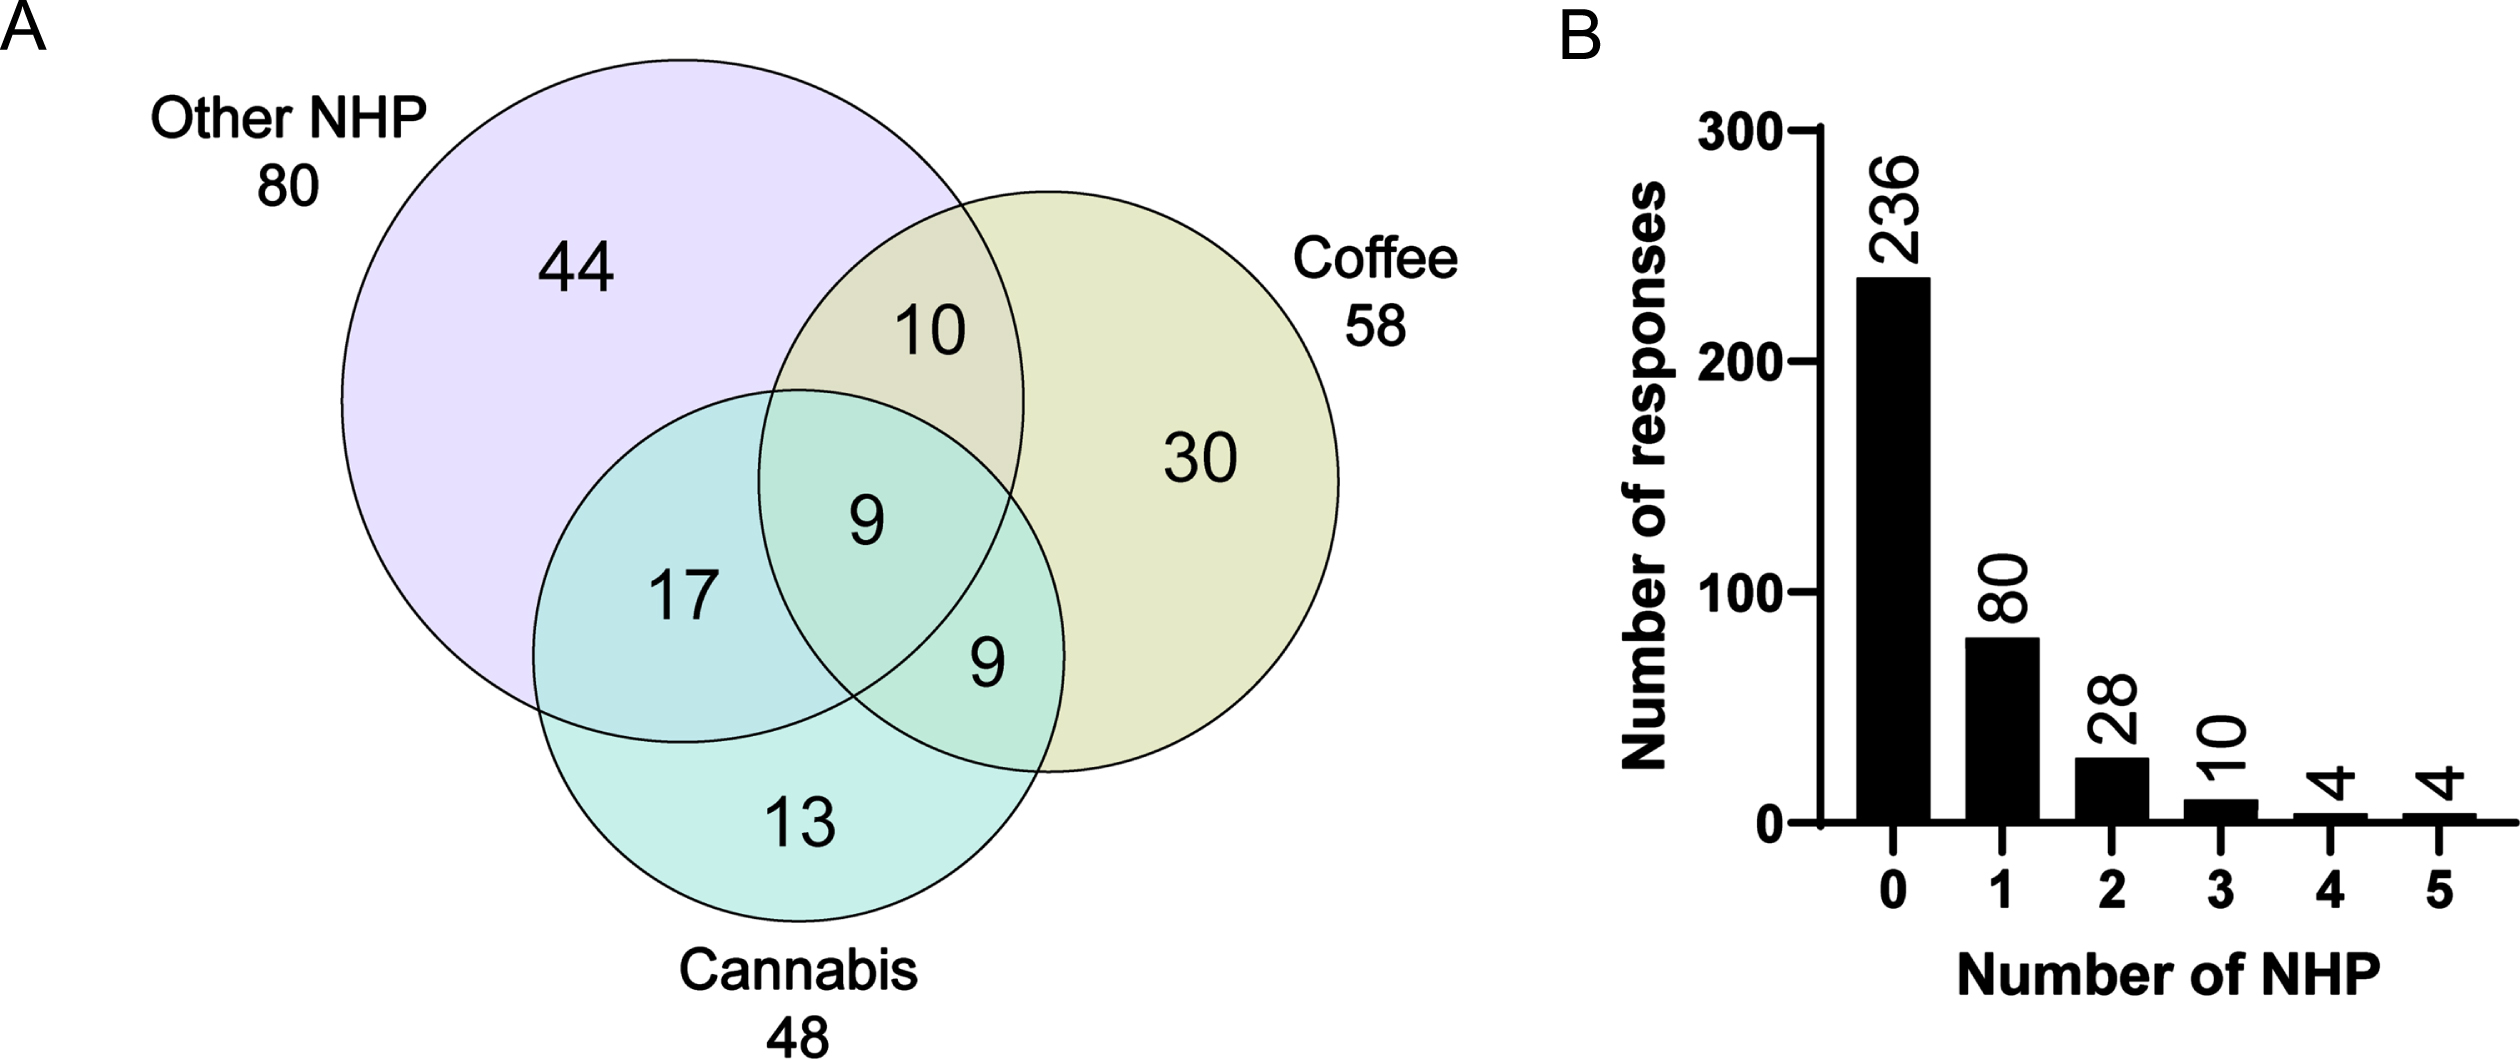 Overview of the usage of single vs. combination of natural health products by people with Parkinson’s disease. A) Venn diagram illustrating the number of participants who acknowledged using natural health products listed in Table 1. Each circle represents the use of coffee, cannabis, or all other natural health products combined. The numbers in these circles represent the number of participants using the corresponding natural health products combination, while the total number of participants who use each natural health products is provided outside the circles. B) Histogram representing the frequency of natural health products use. The “other” category is excluded in this histogram. NHP, natural health products.